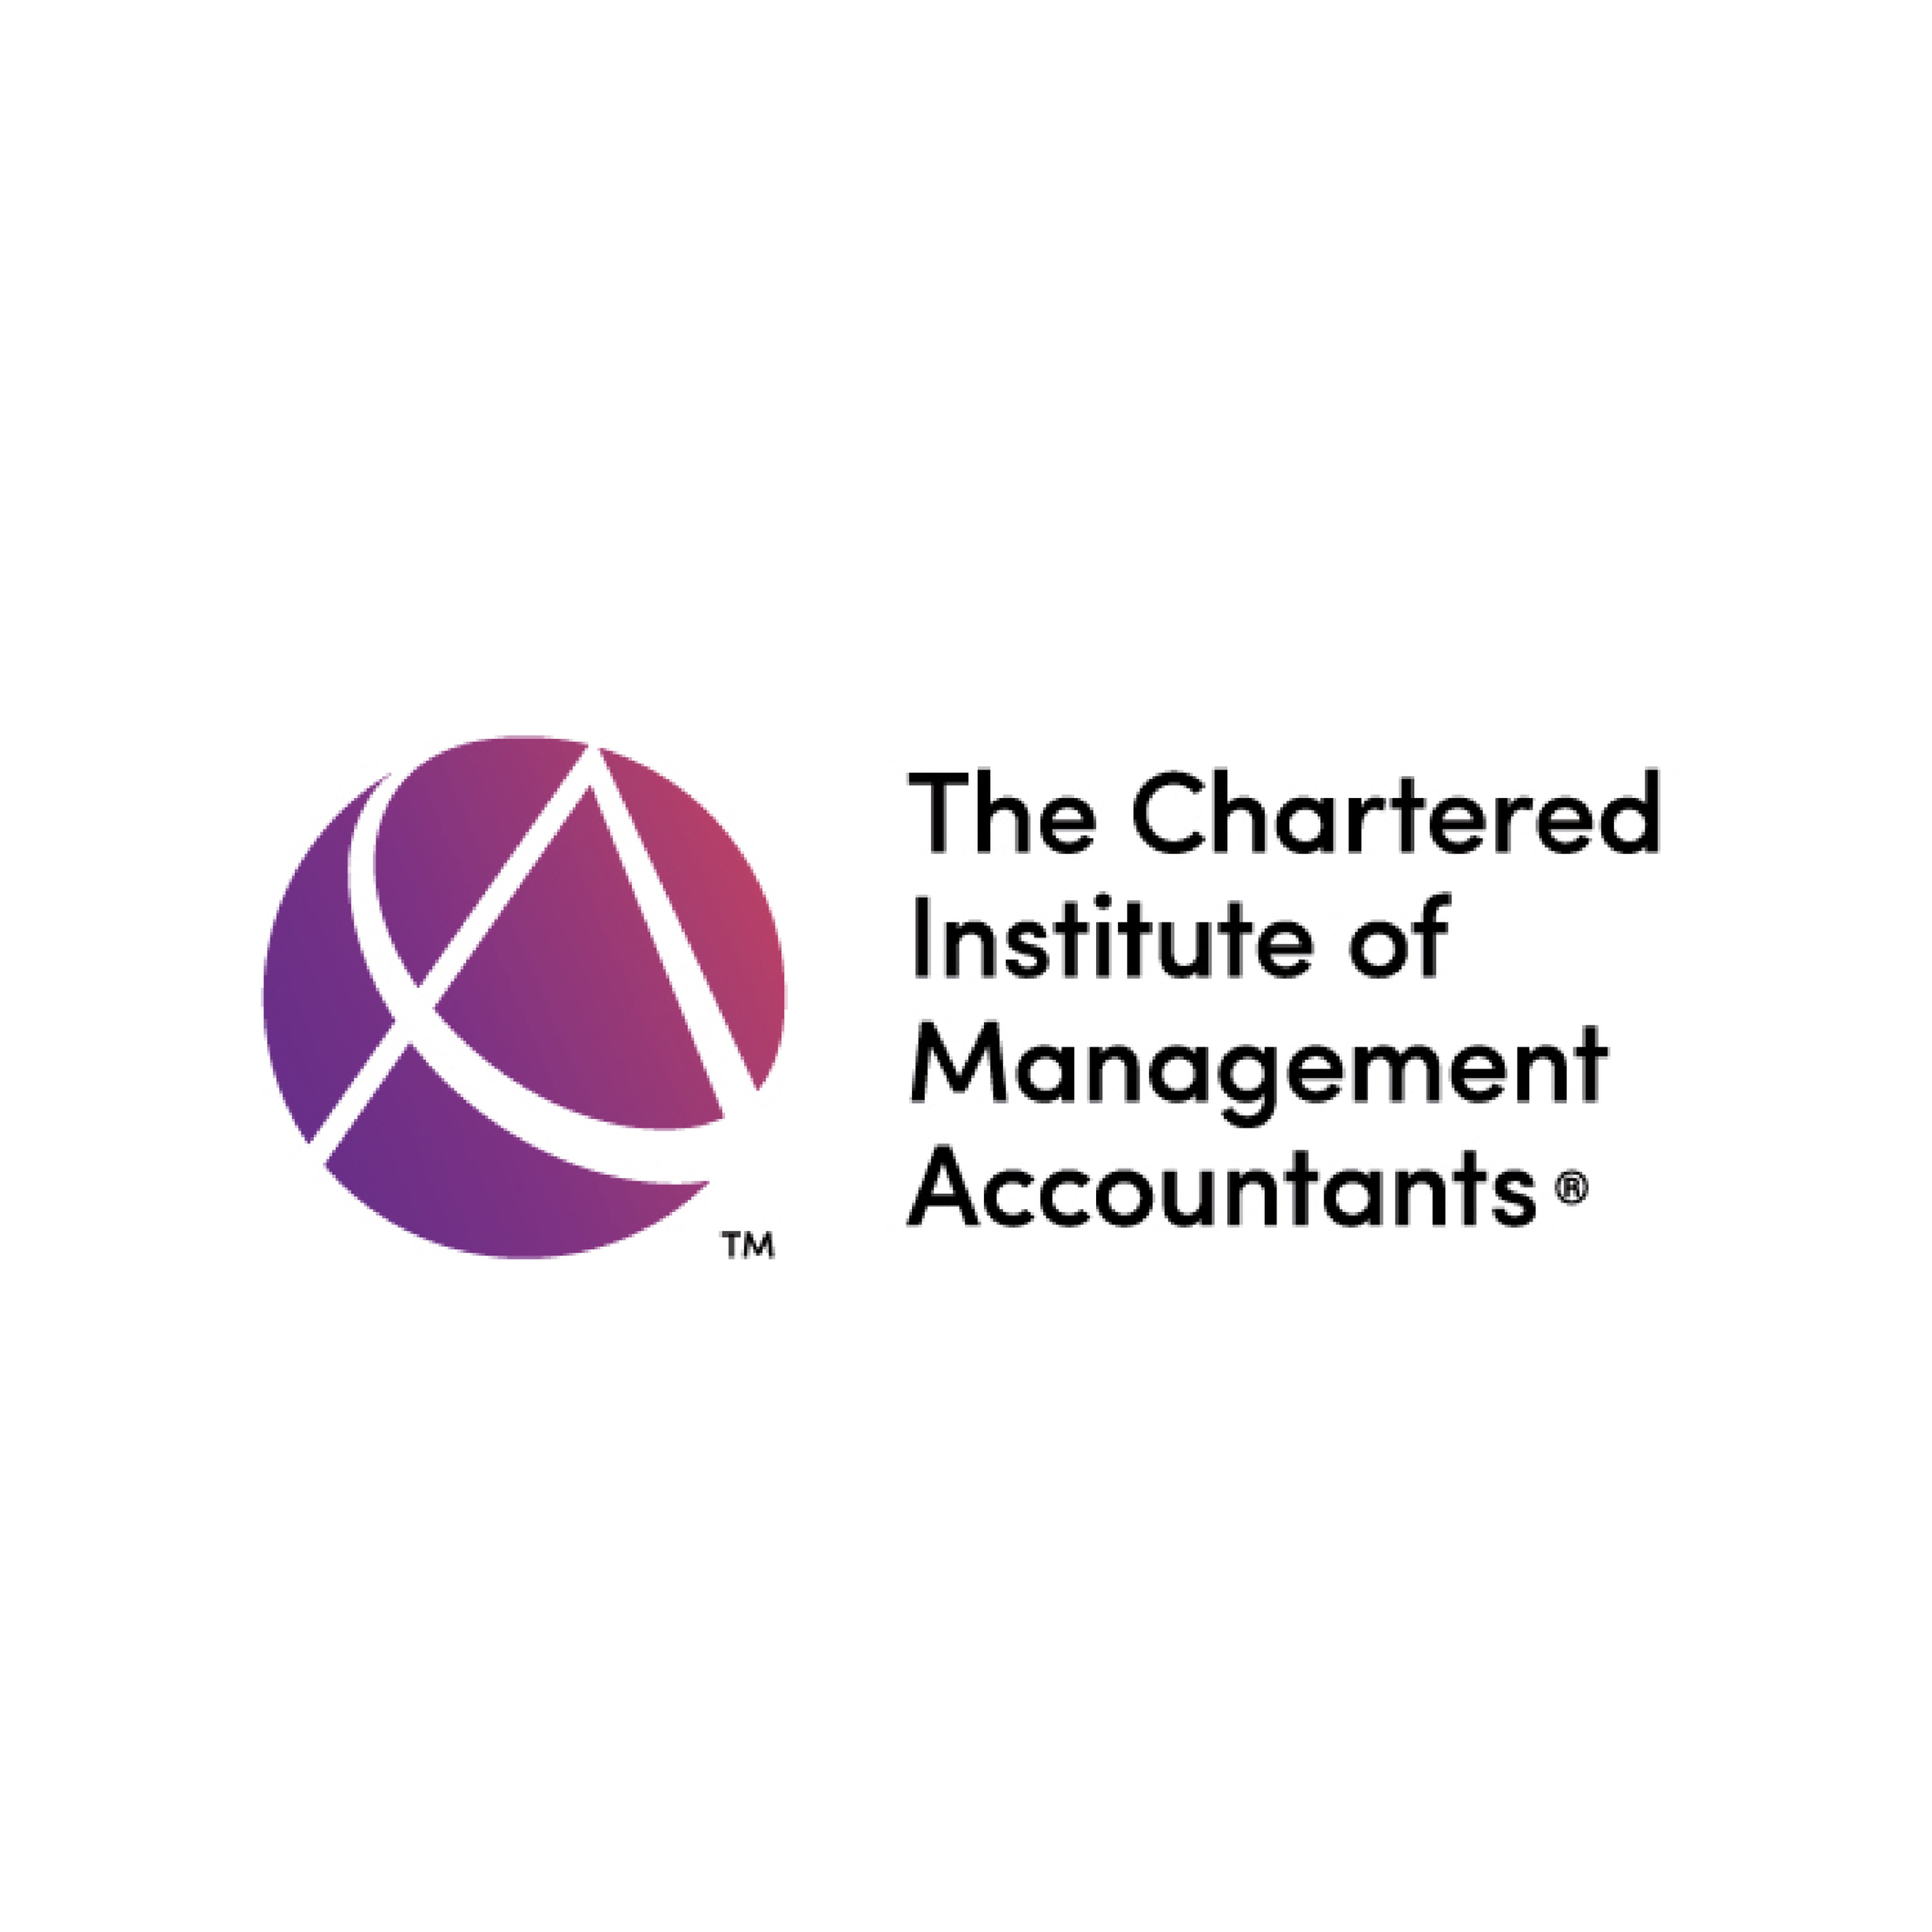 Chartered Institute of Management Accountants® (CIMA)